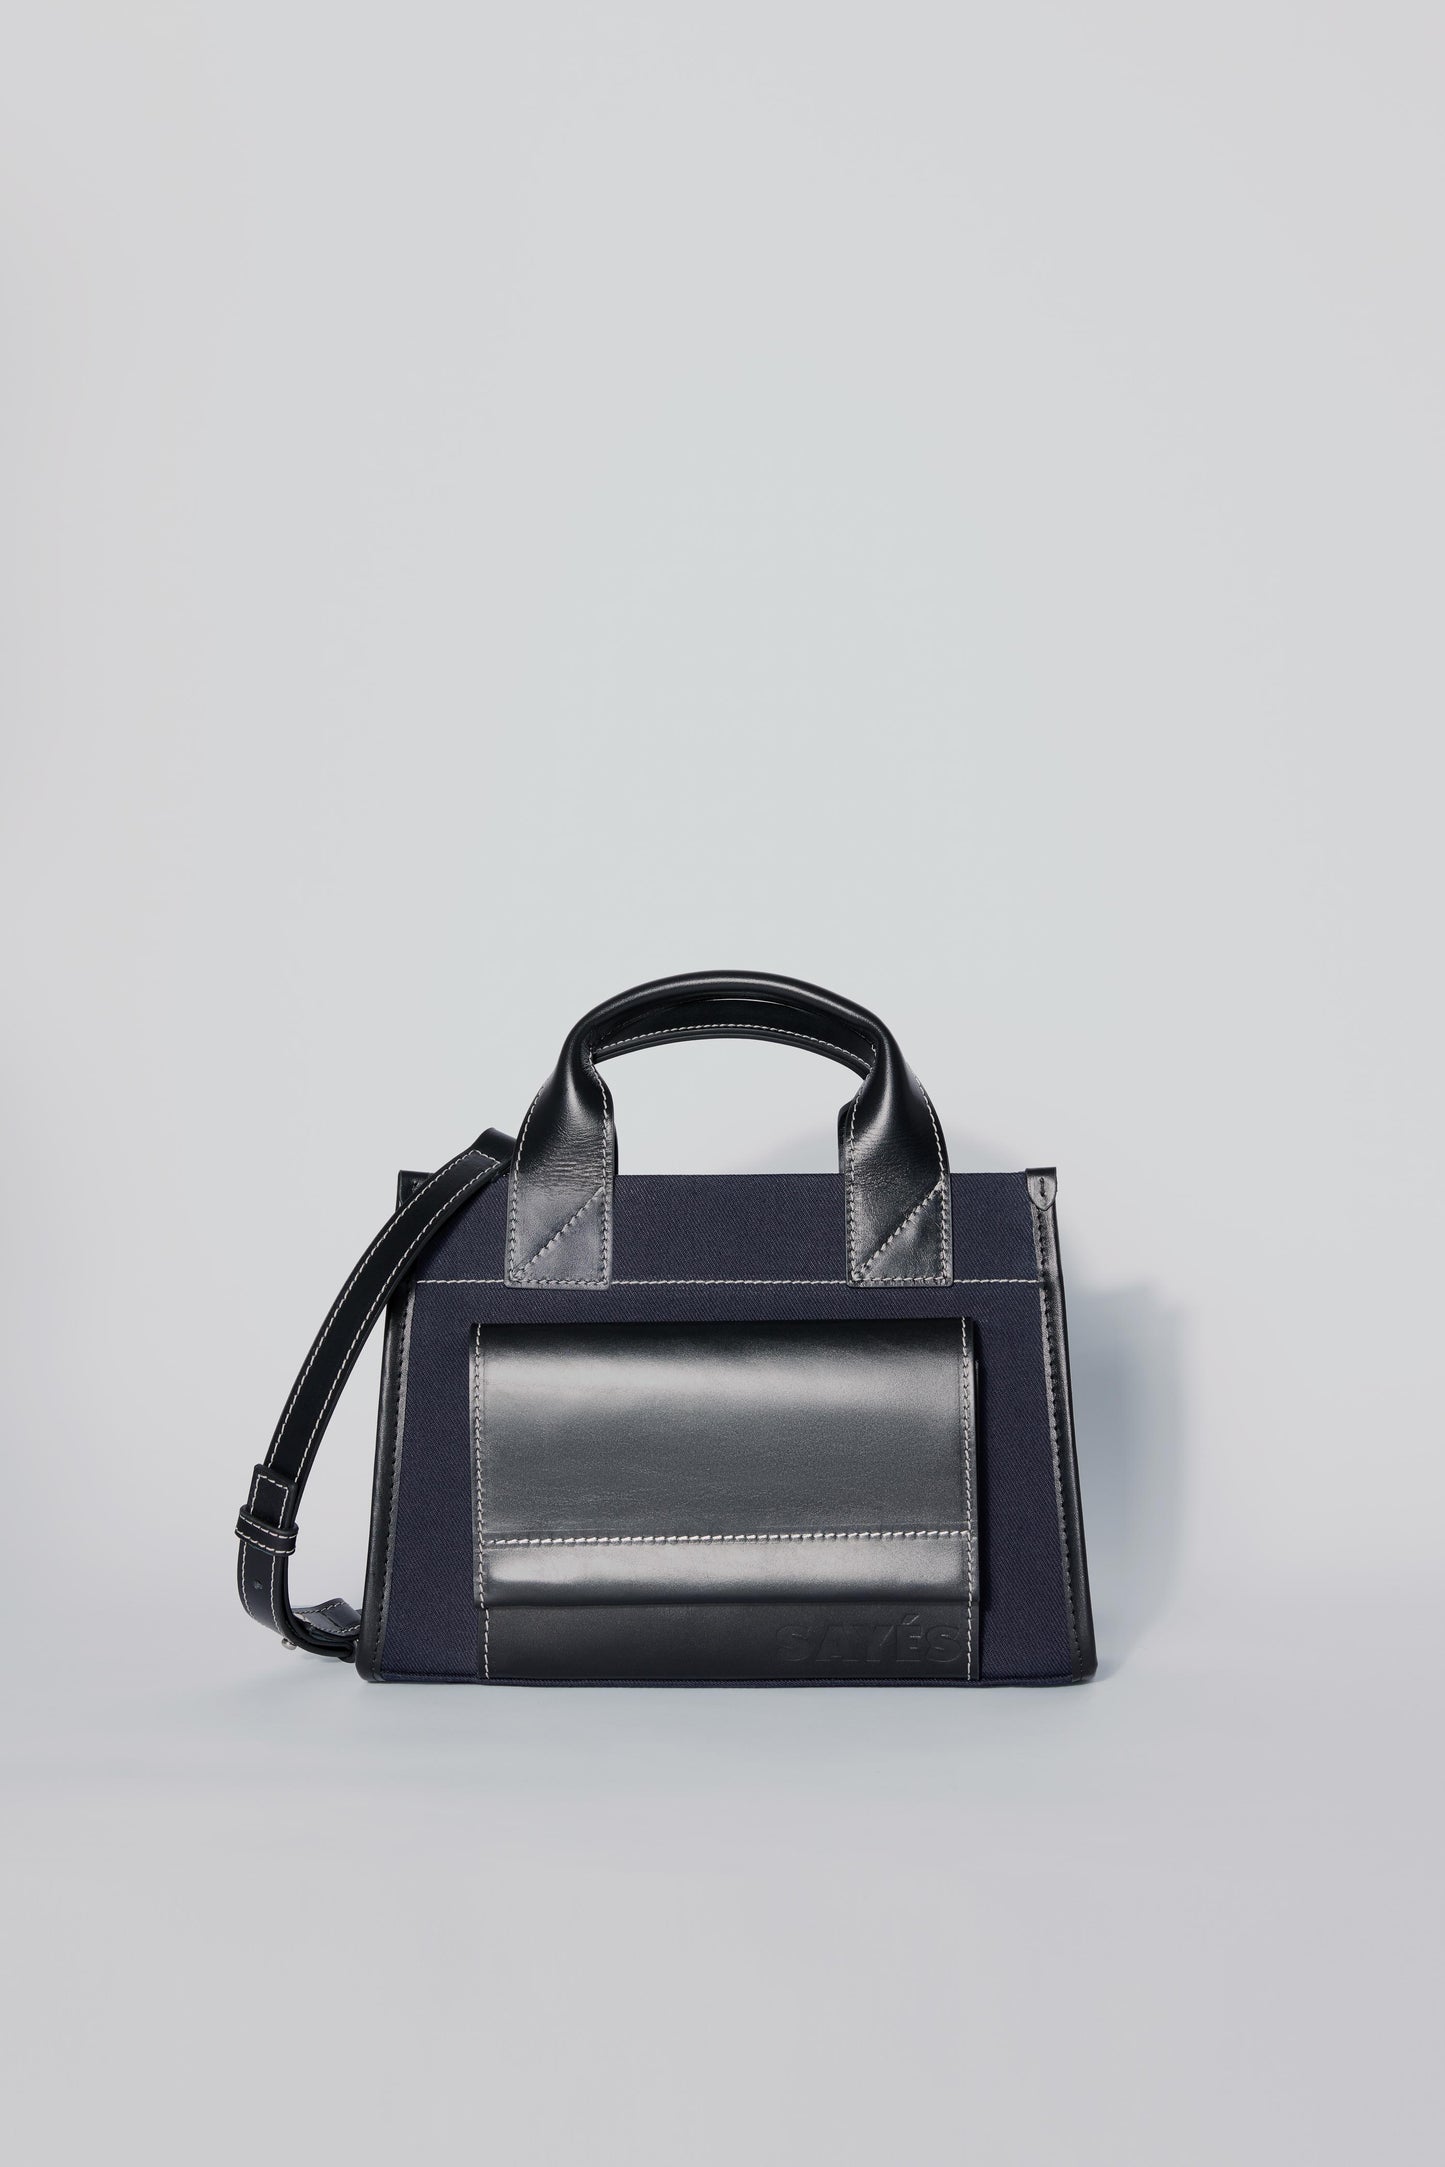 STITCHED POCKET MINI TOTE BAG IN NAVY AND BLACK